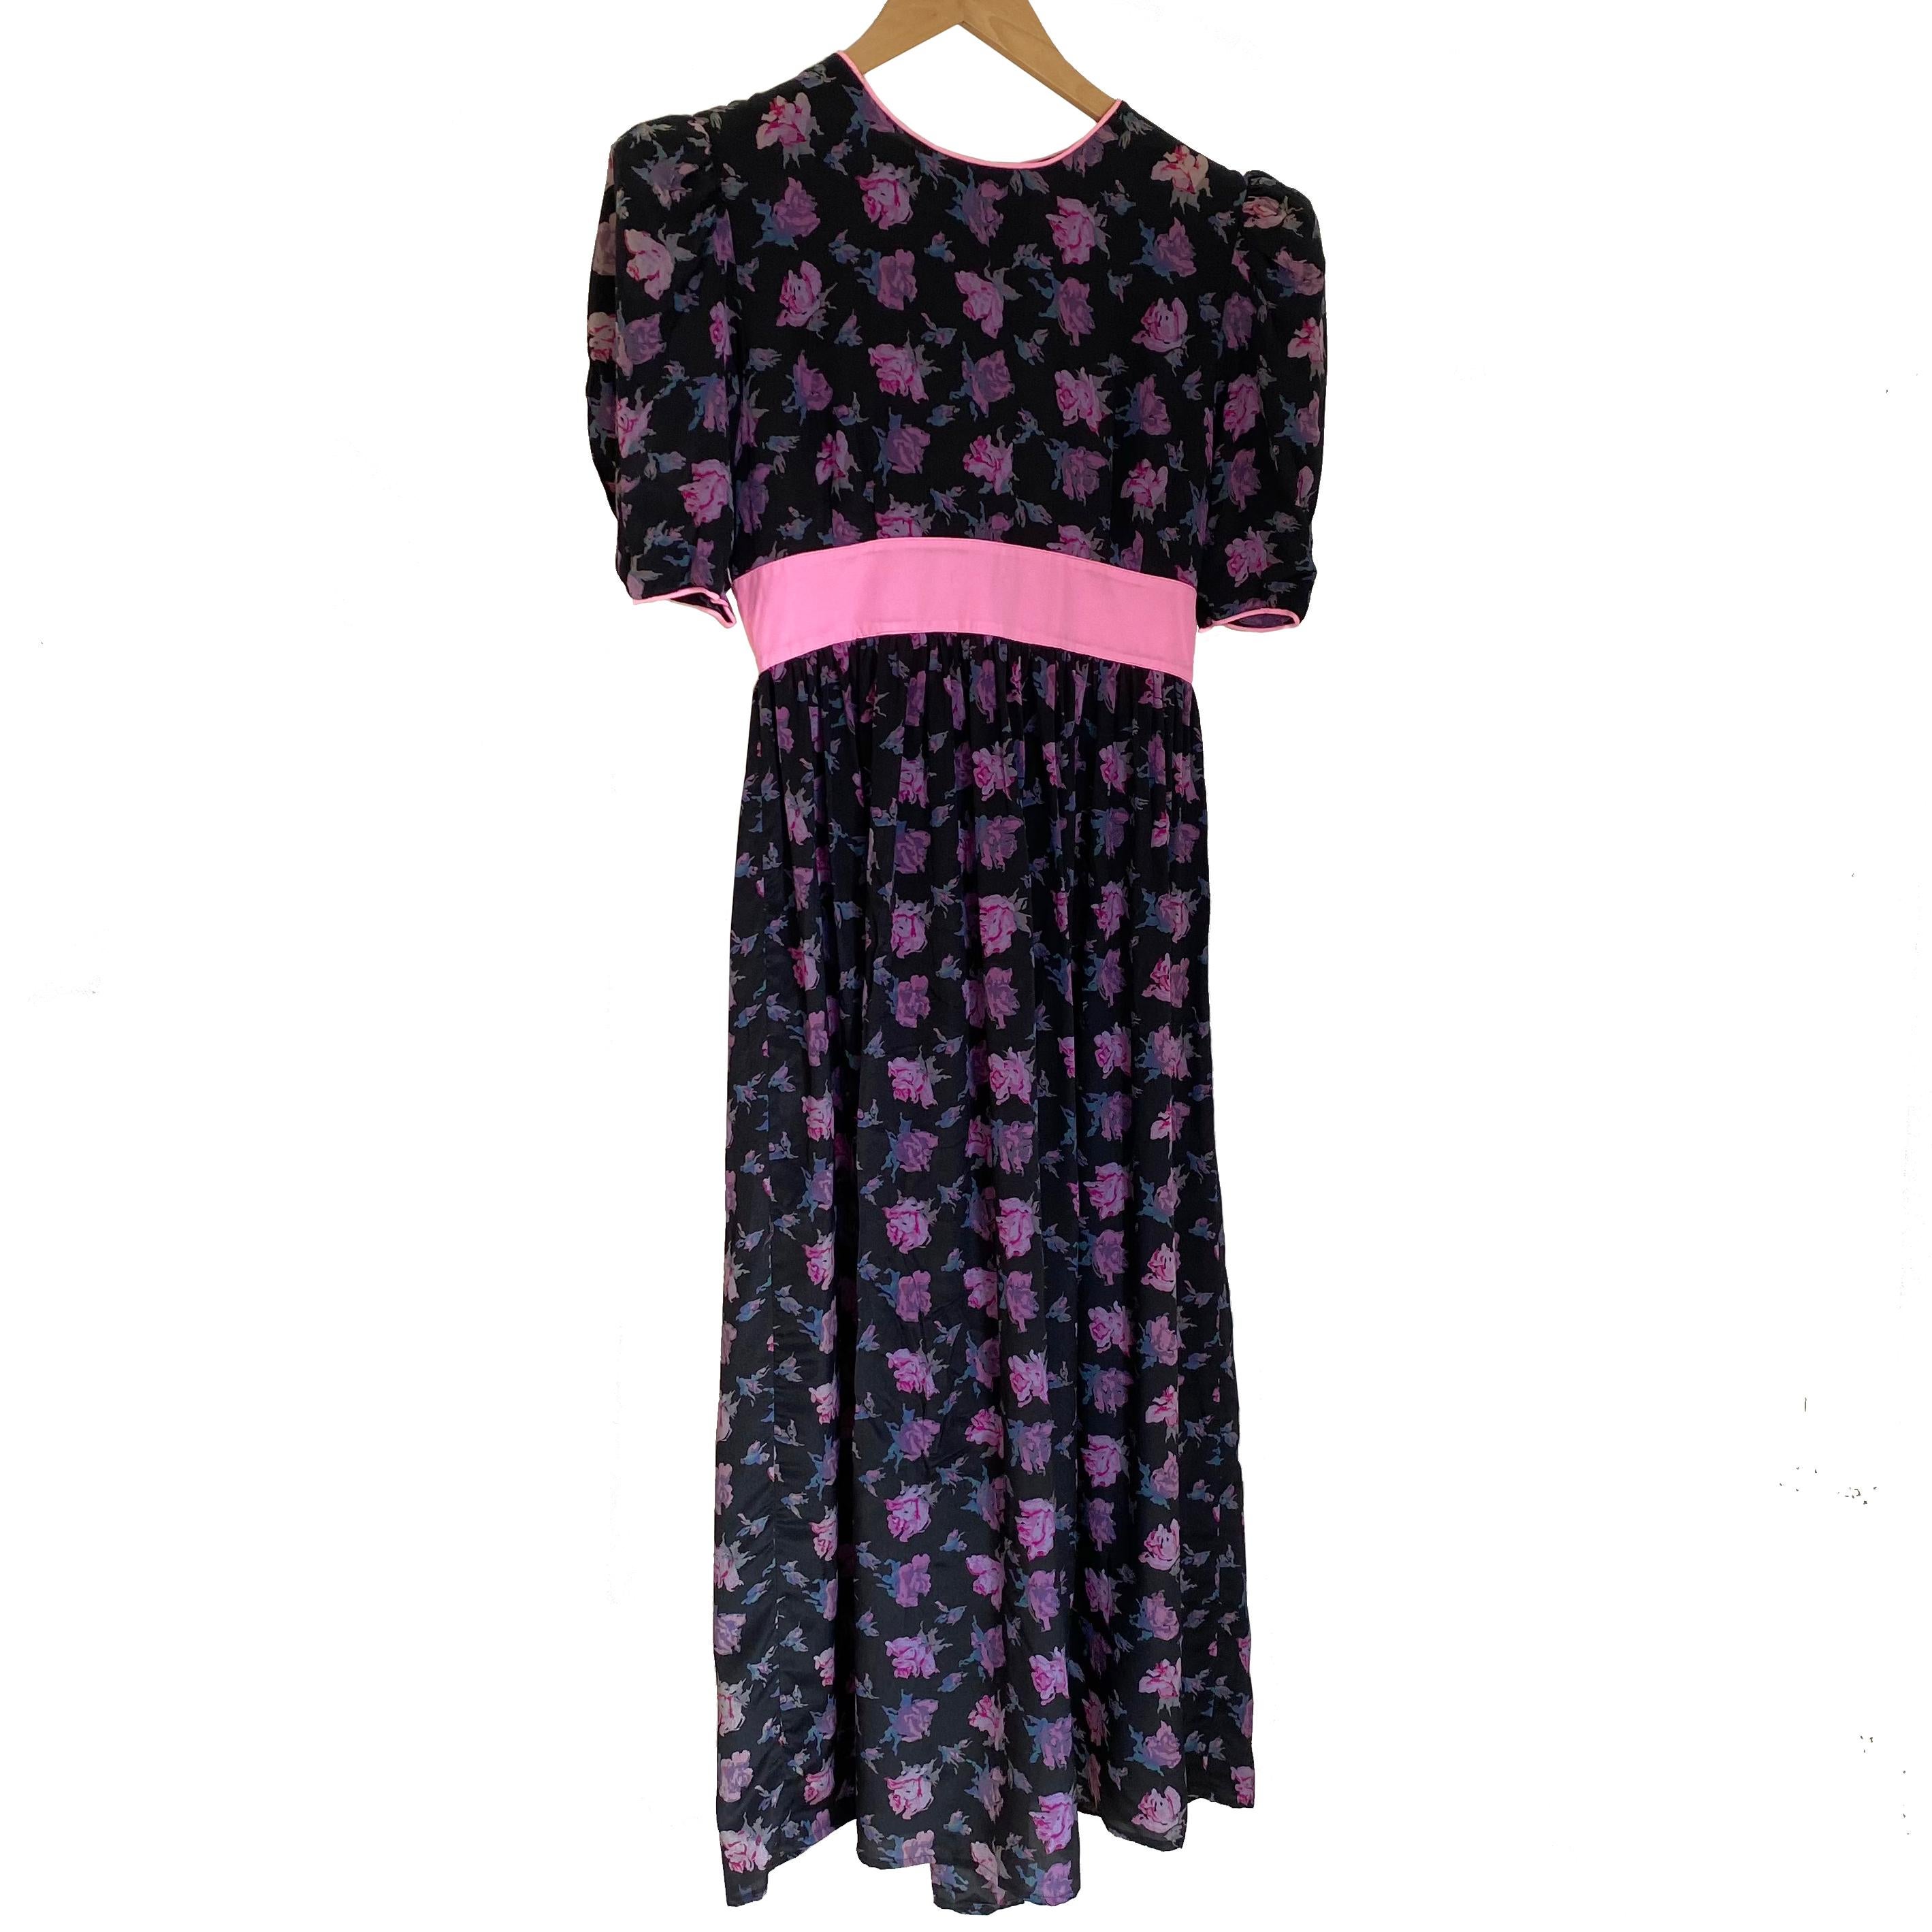 Pre-washed rosebud print black silk crepe FLORA KUNG princess dress In Excellent Condition For Sale In Boston, MA